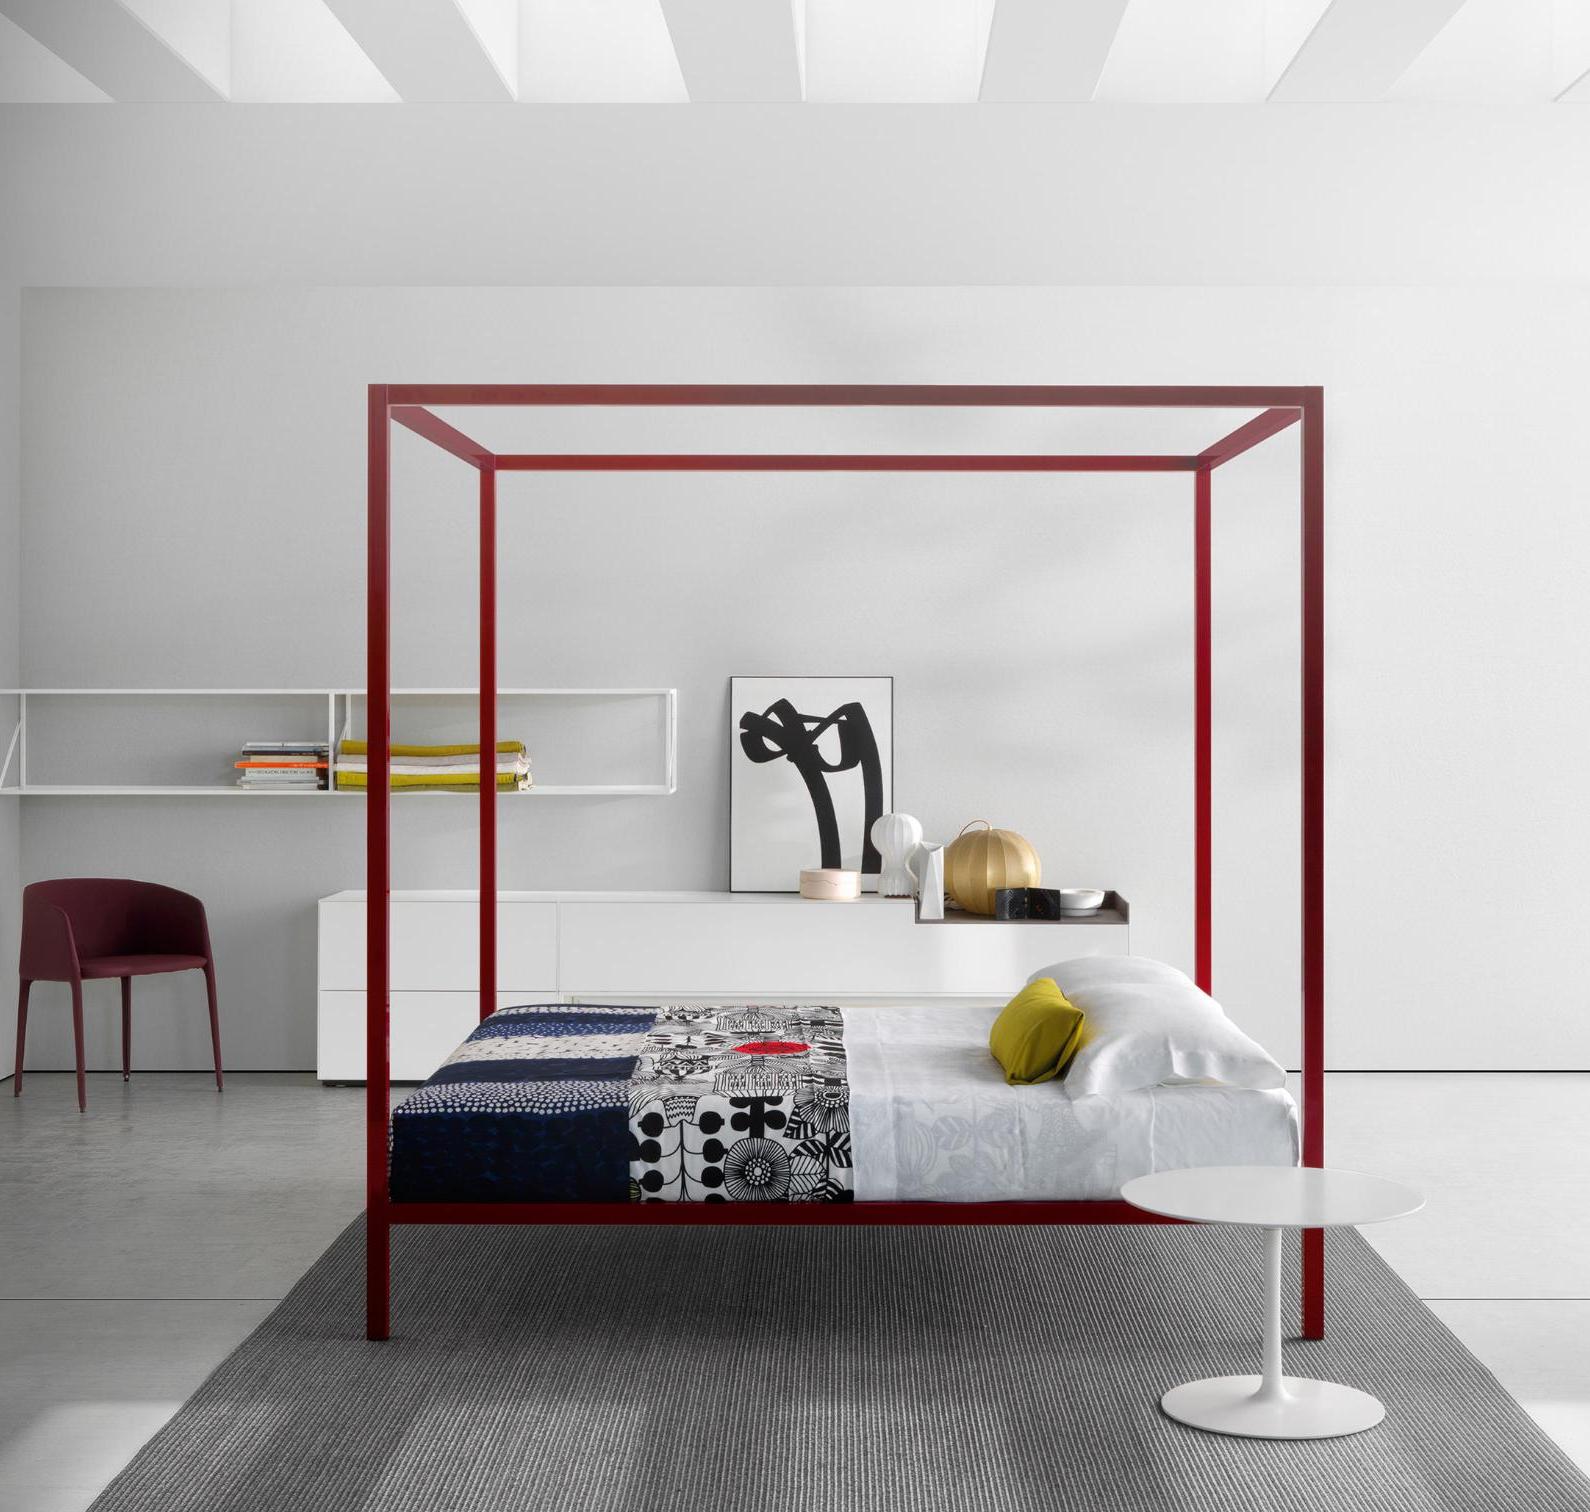 Luxurious Aluminium Canopy Bed Italian Style ☞ Structure: Gloss Painted White X060 ☞ Dimensions: 180 x 210 cm